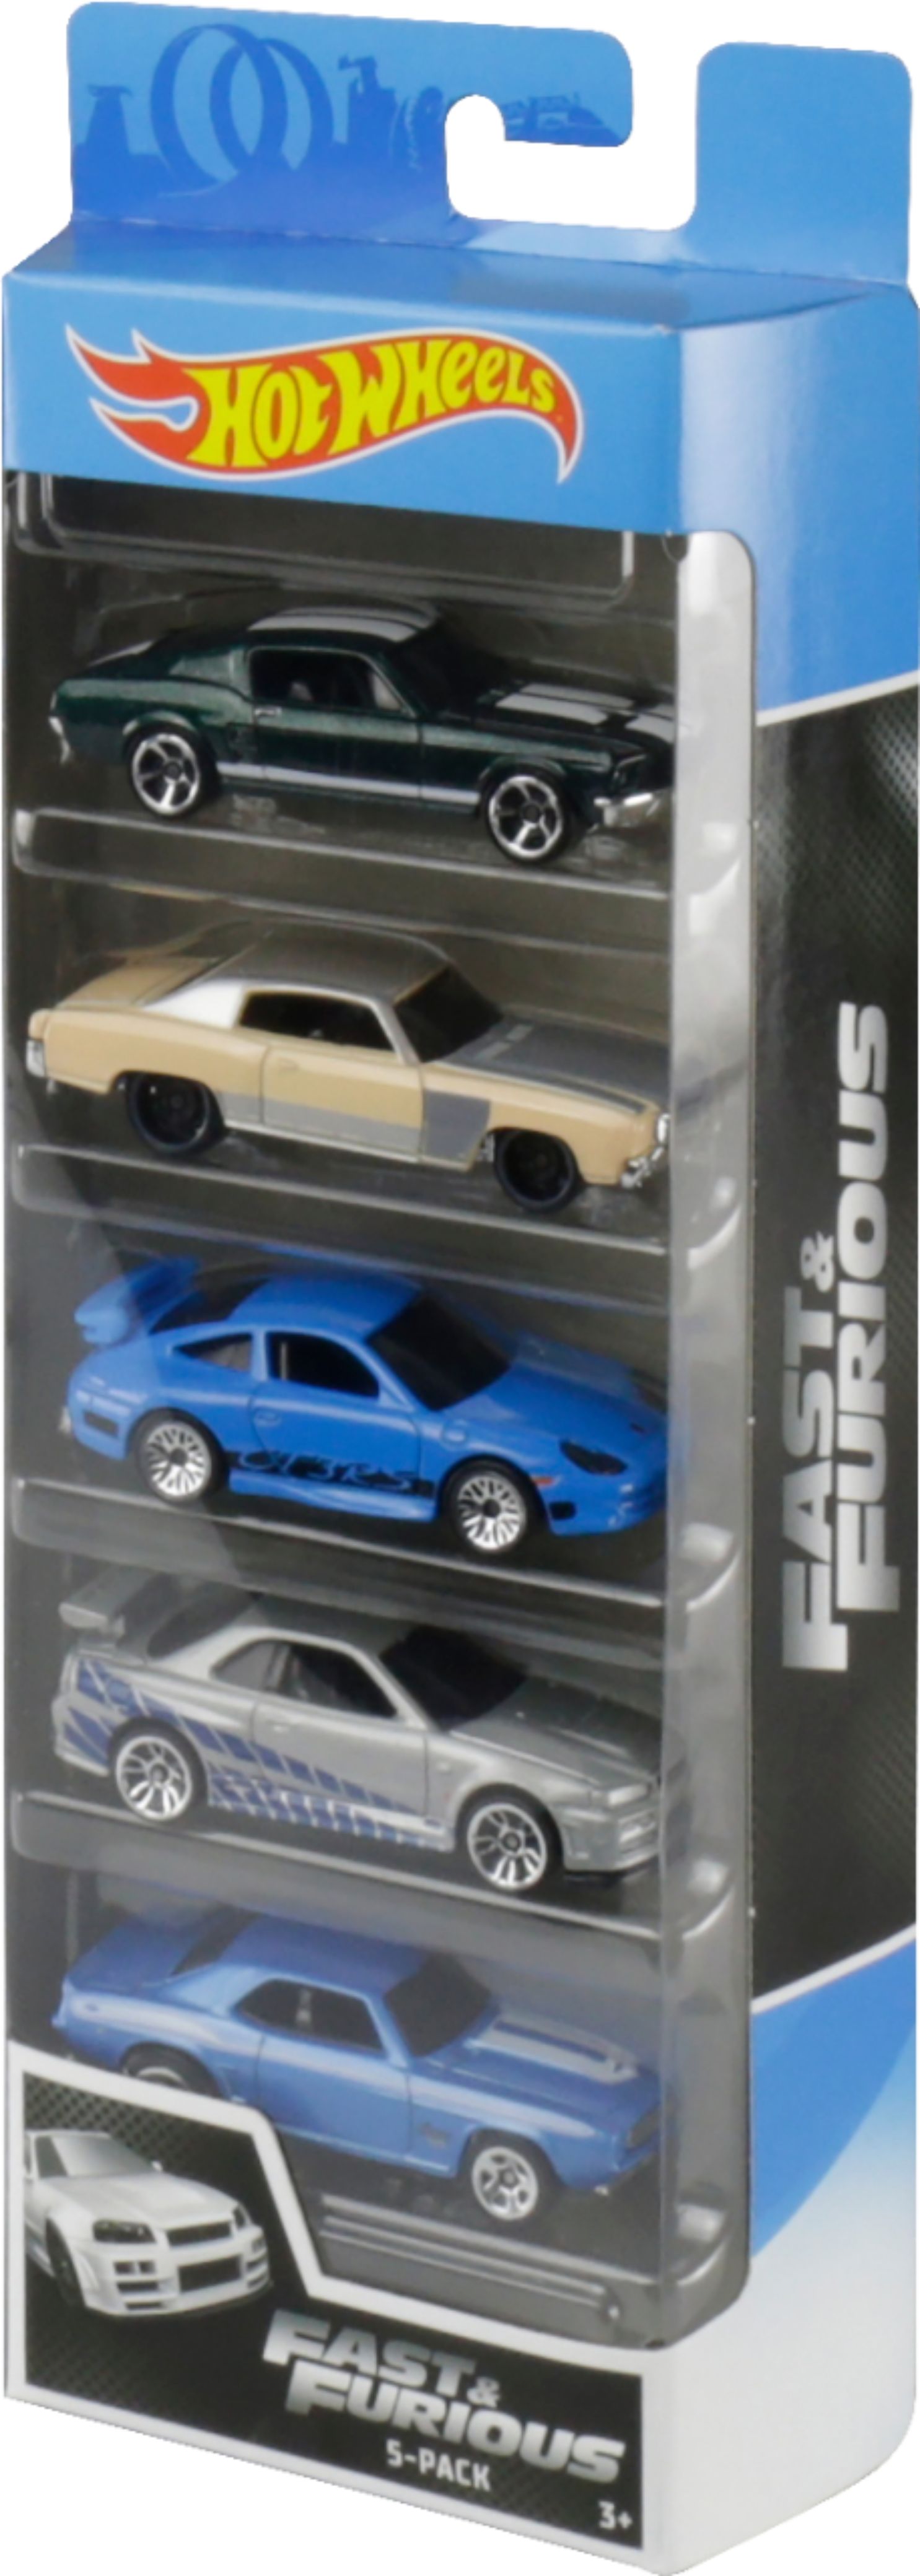 Best Buy Hot Wheels Fast and Furious 5 Pack Vehicles GMG69